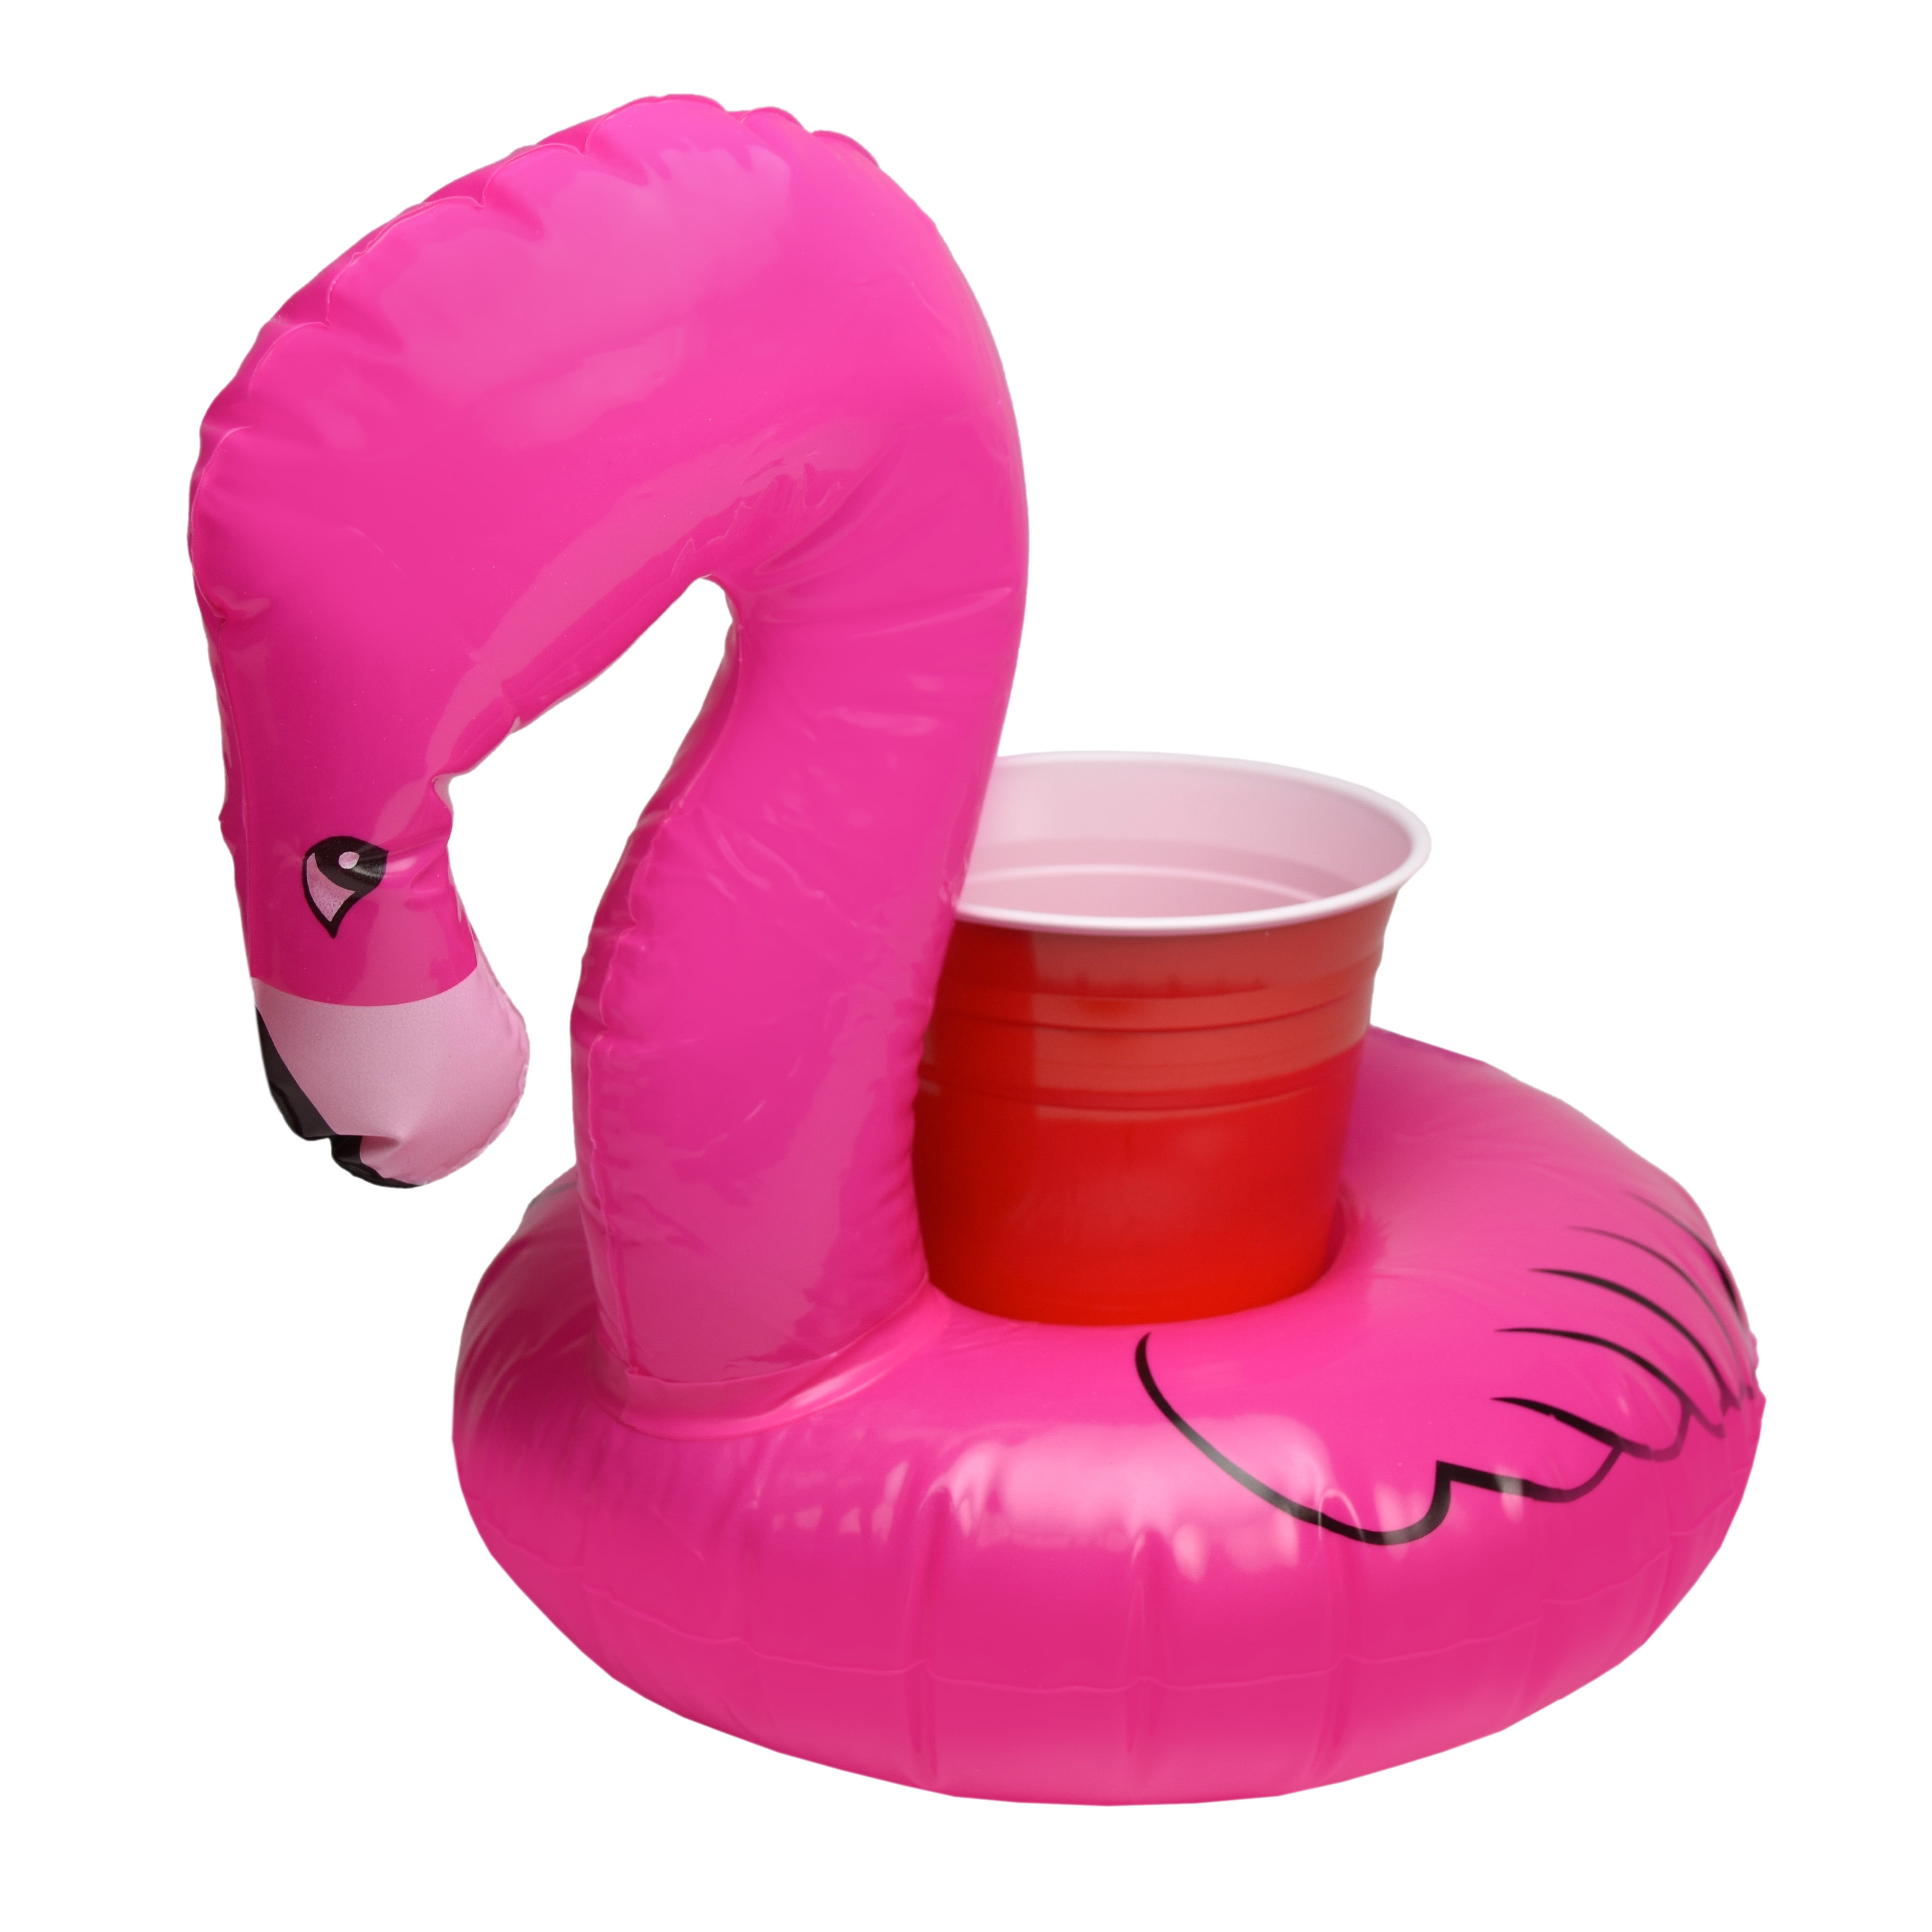 Flamingo Cup15 for sale online Funky Tropical Inflatable Drinks Holder 